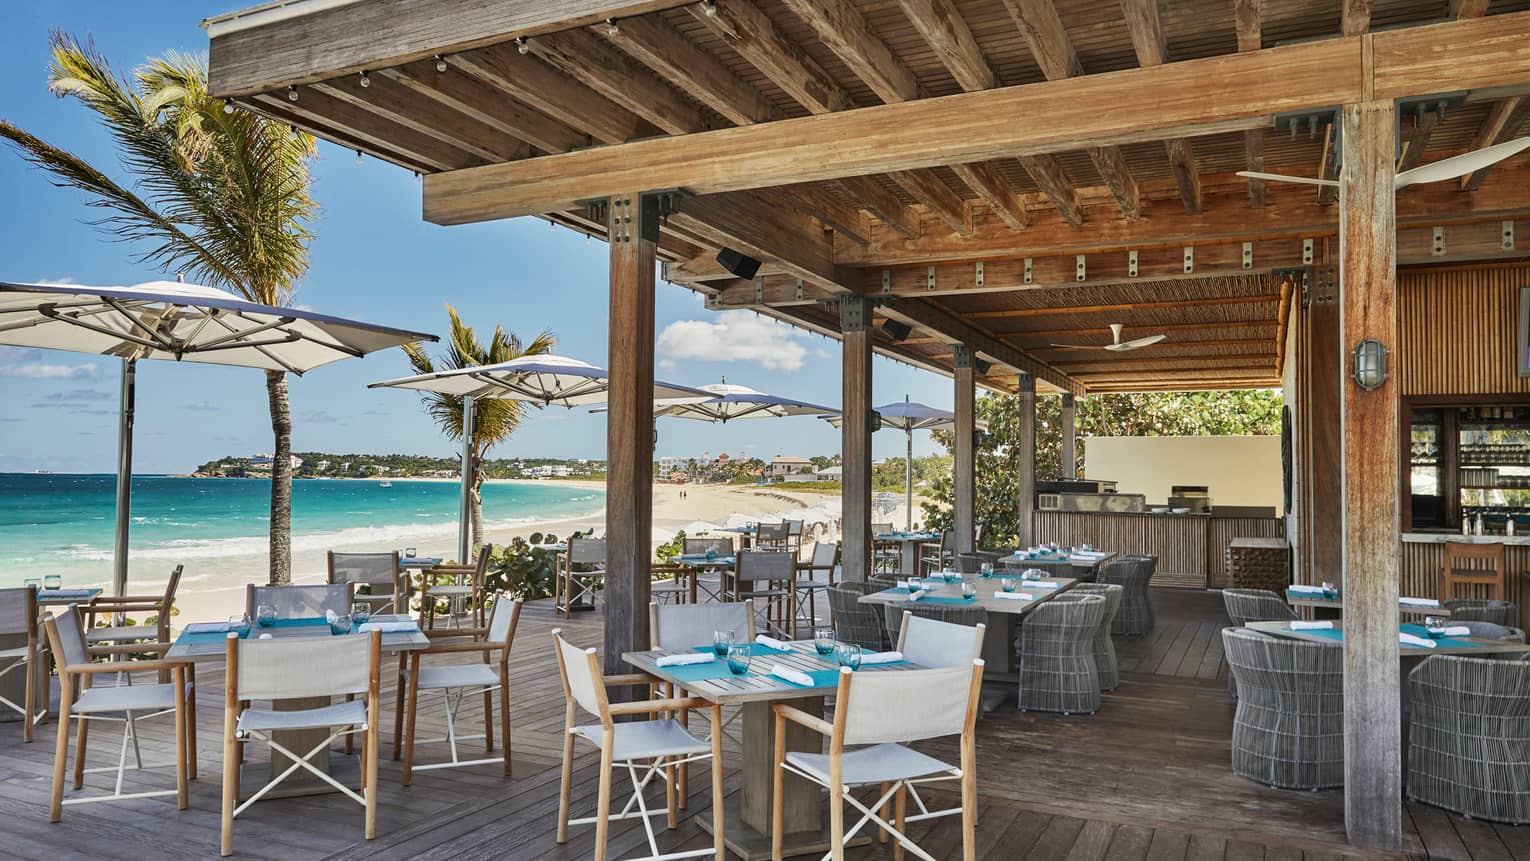 Bamboo restaurant outdoor patio, tables and chairs under wood pergola, beside sunny beach